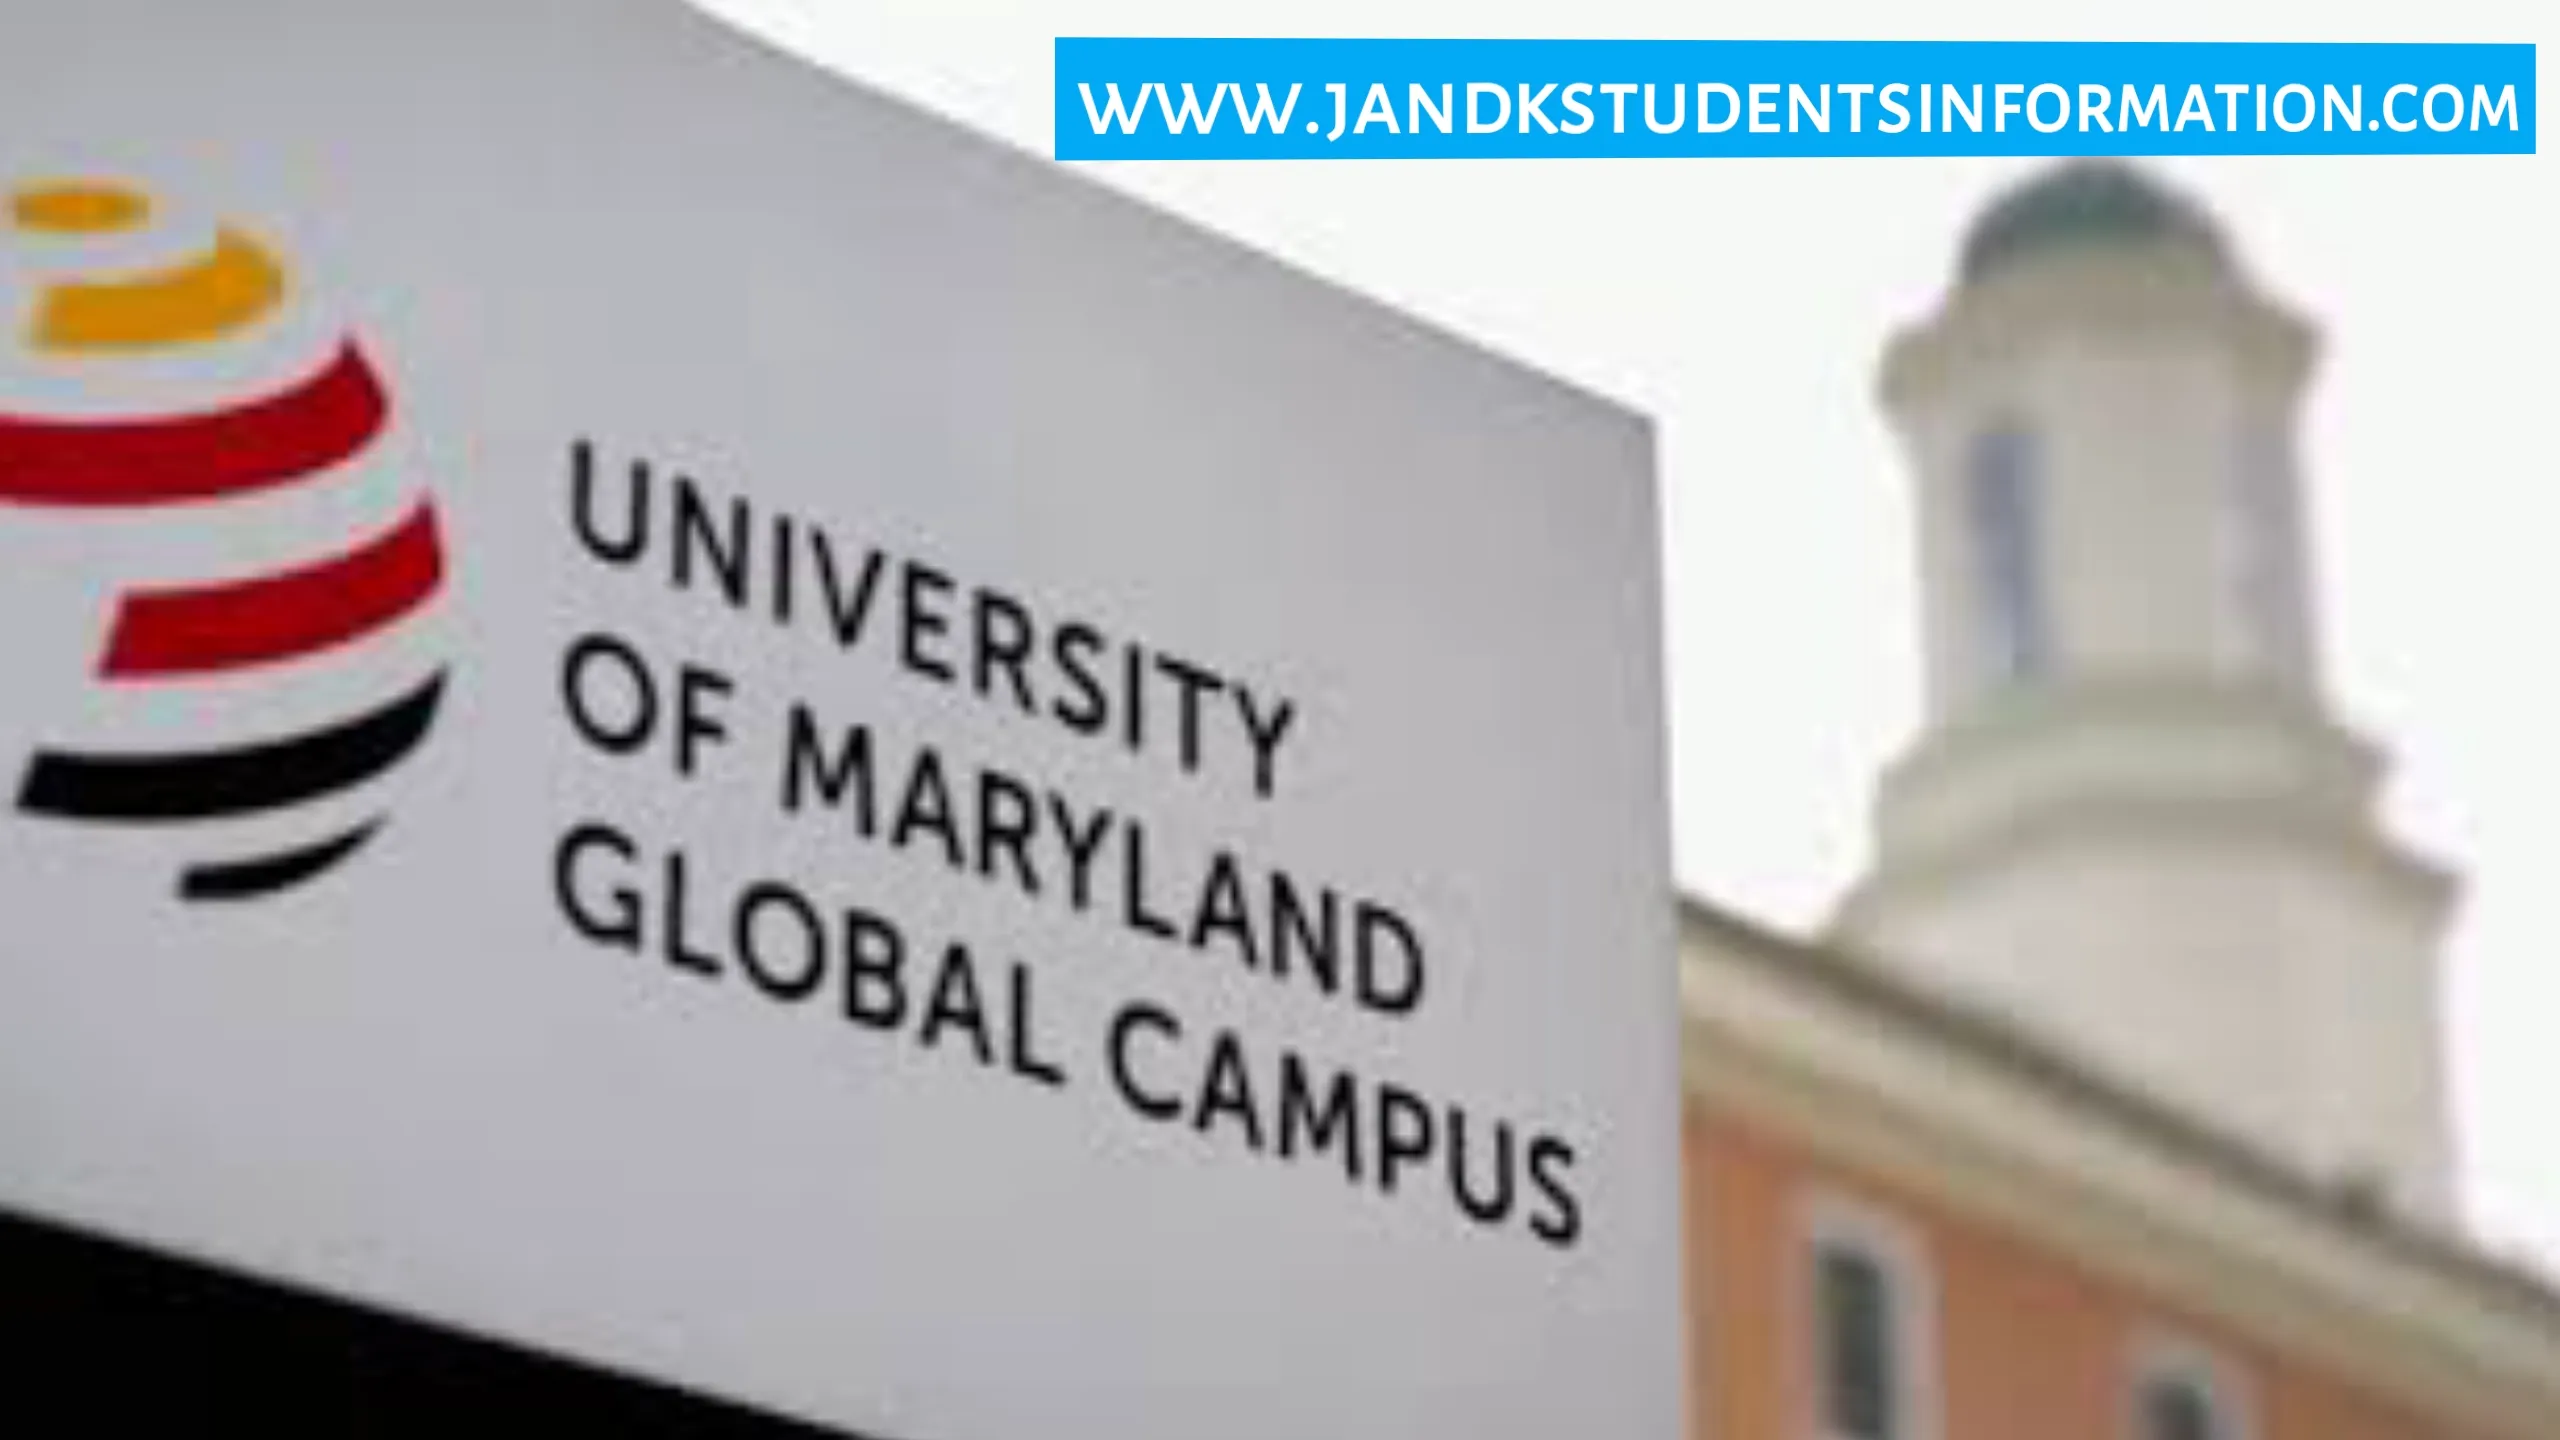 University of Maryland Global Campus Admission Process, Courses Offered & Other Details